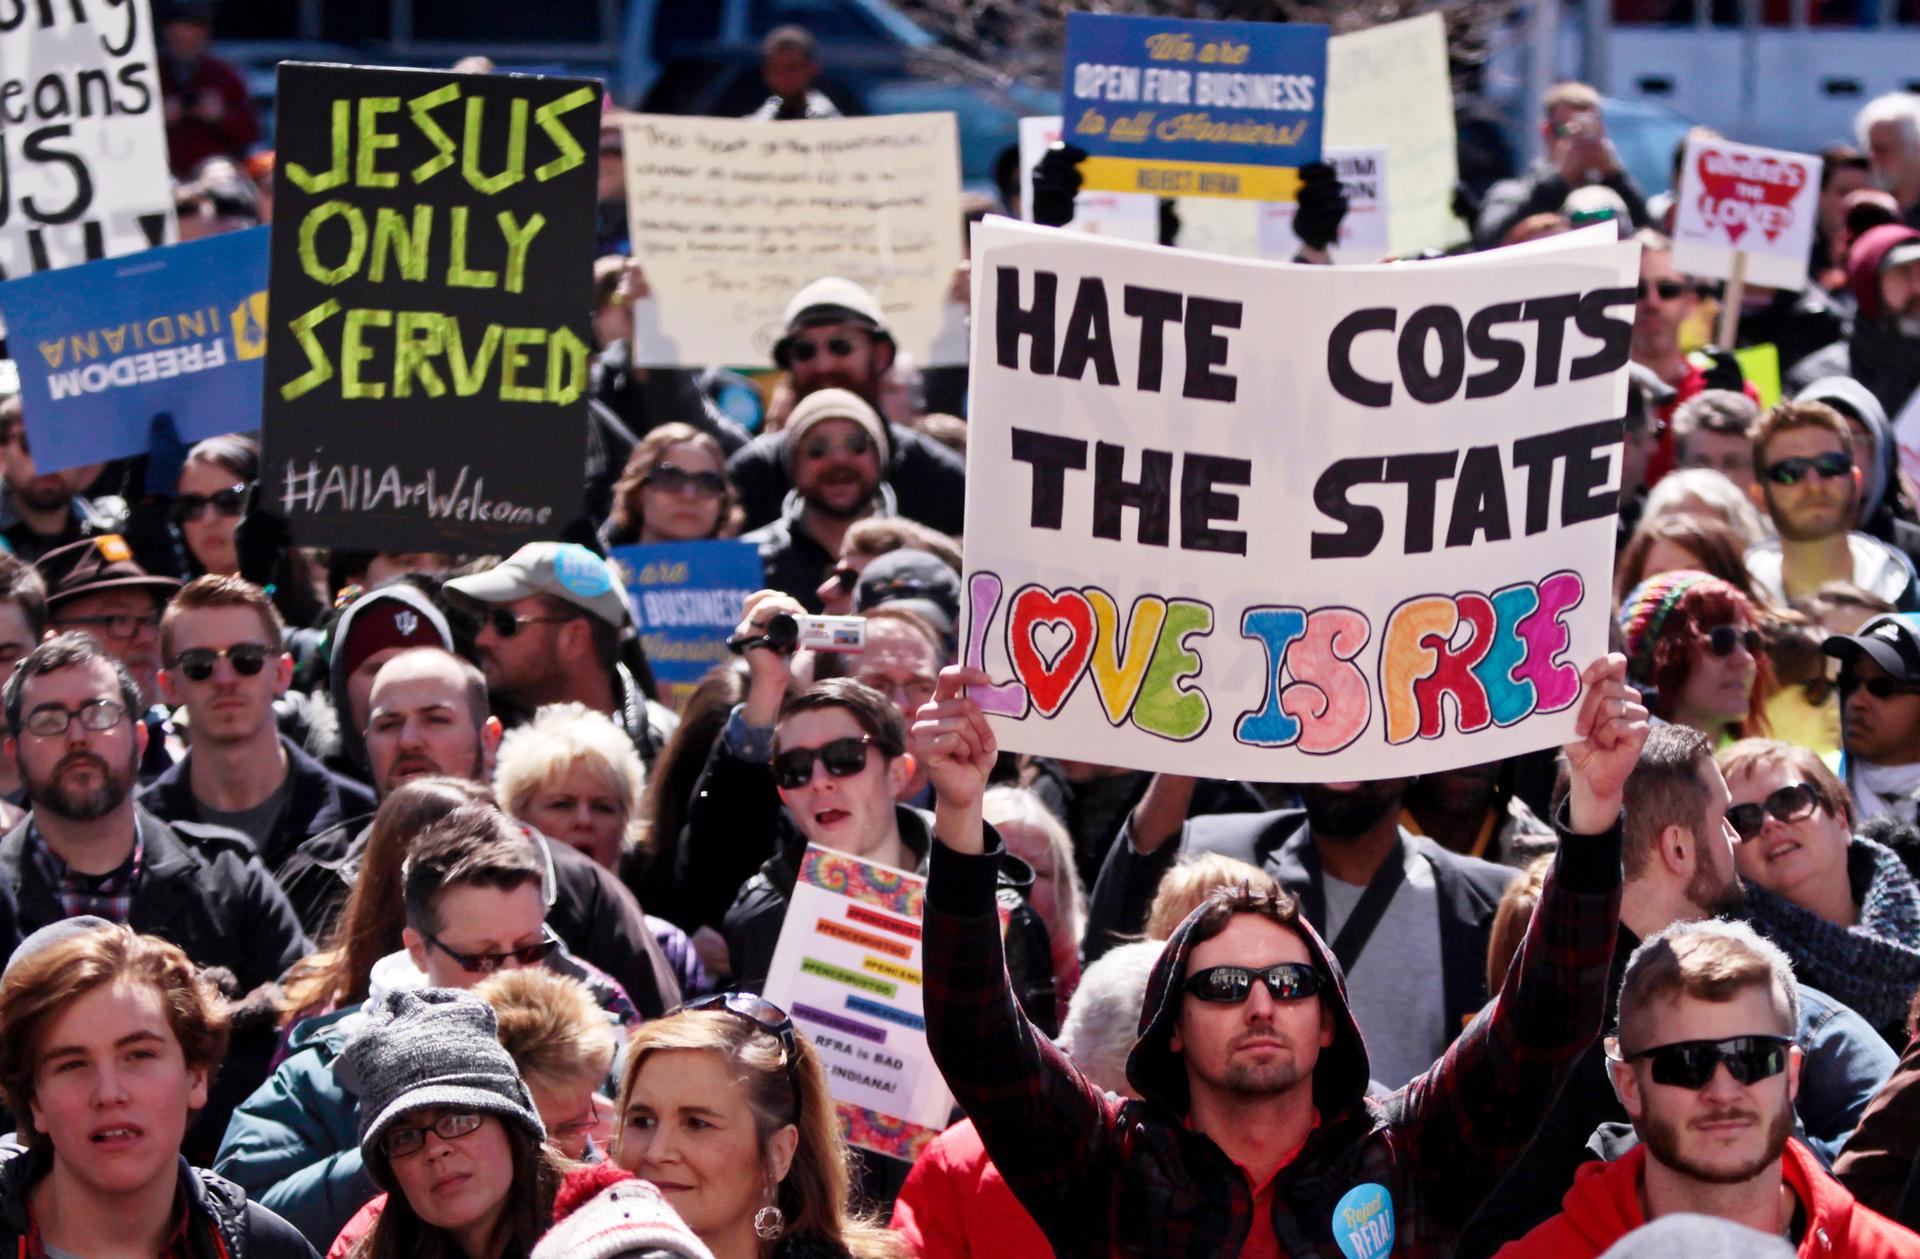 Demonstrators gather at Monument Circle to protest a controversial religious freedom bill recently signed by Governor Mike Pence, during a rally in Indianapolis on March 28, 2015.